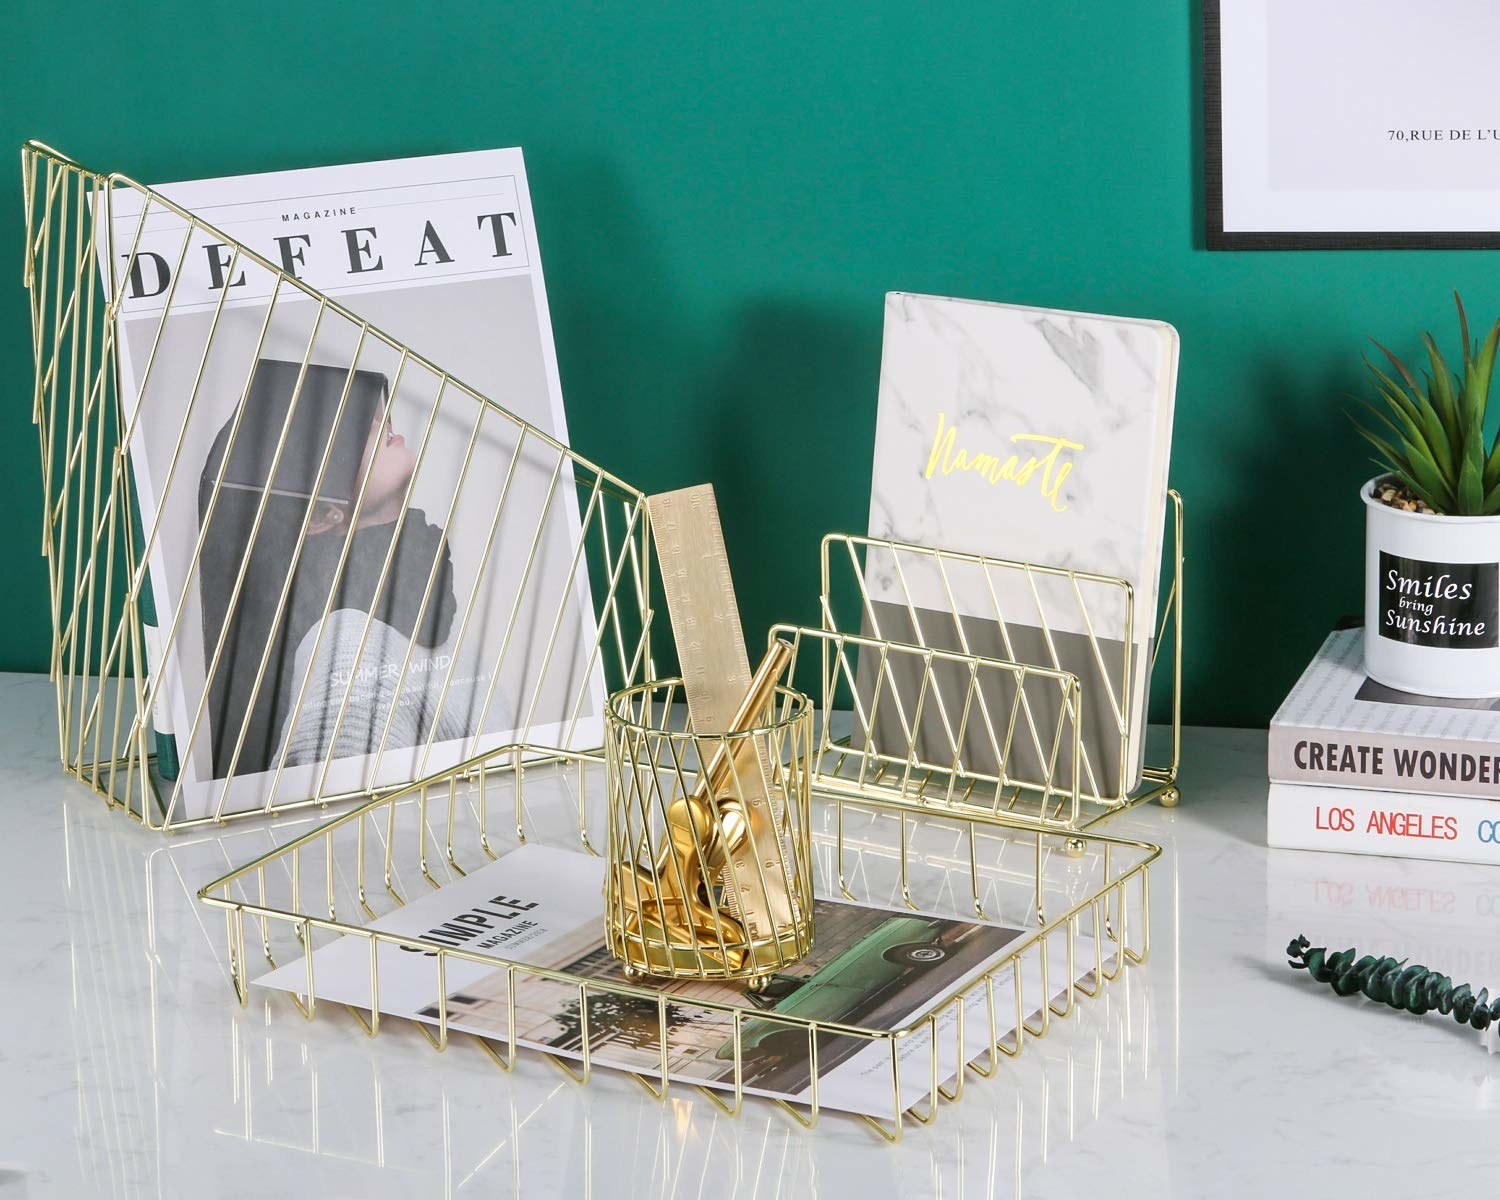 The desktop organizers holding magazines notebooks rulers and other stationary